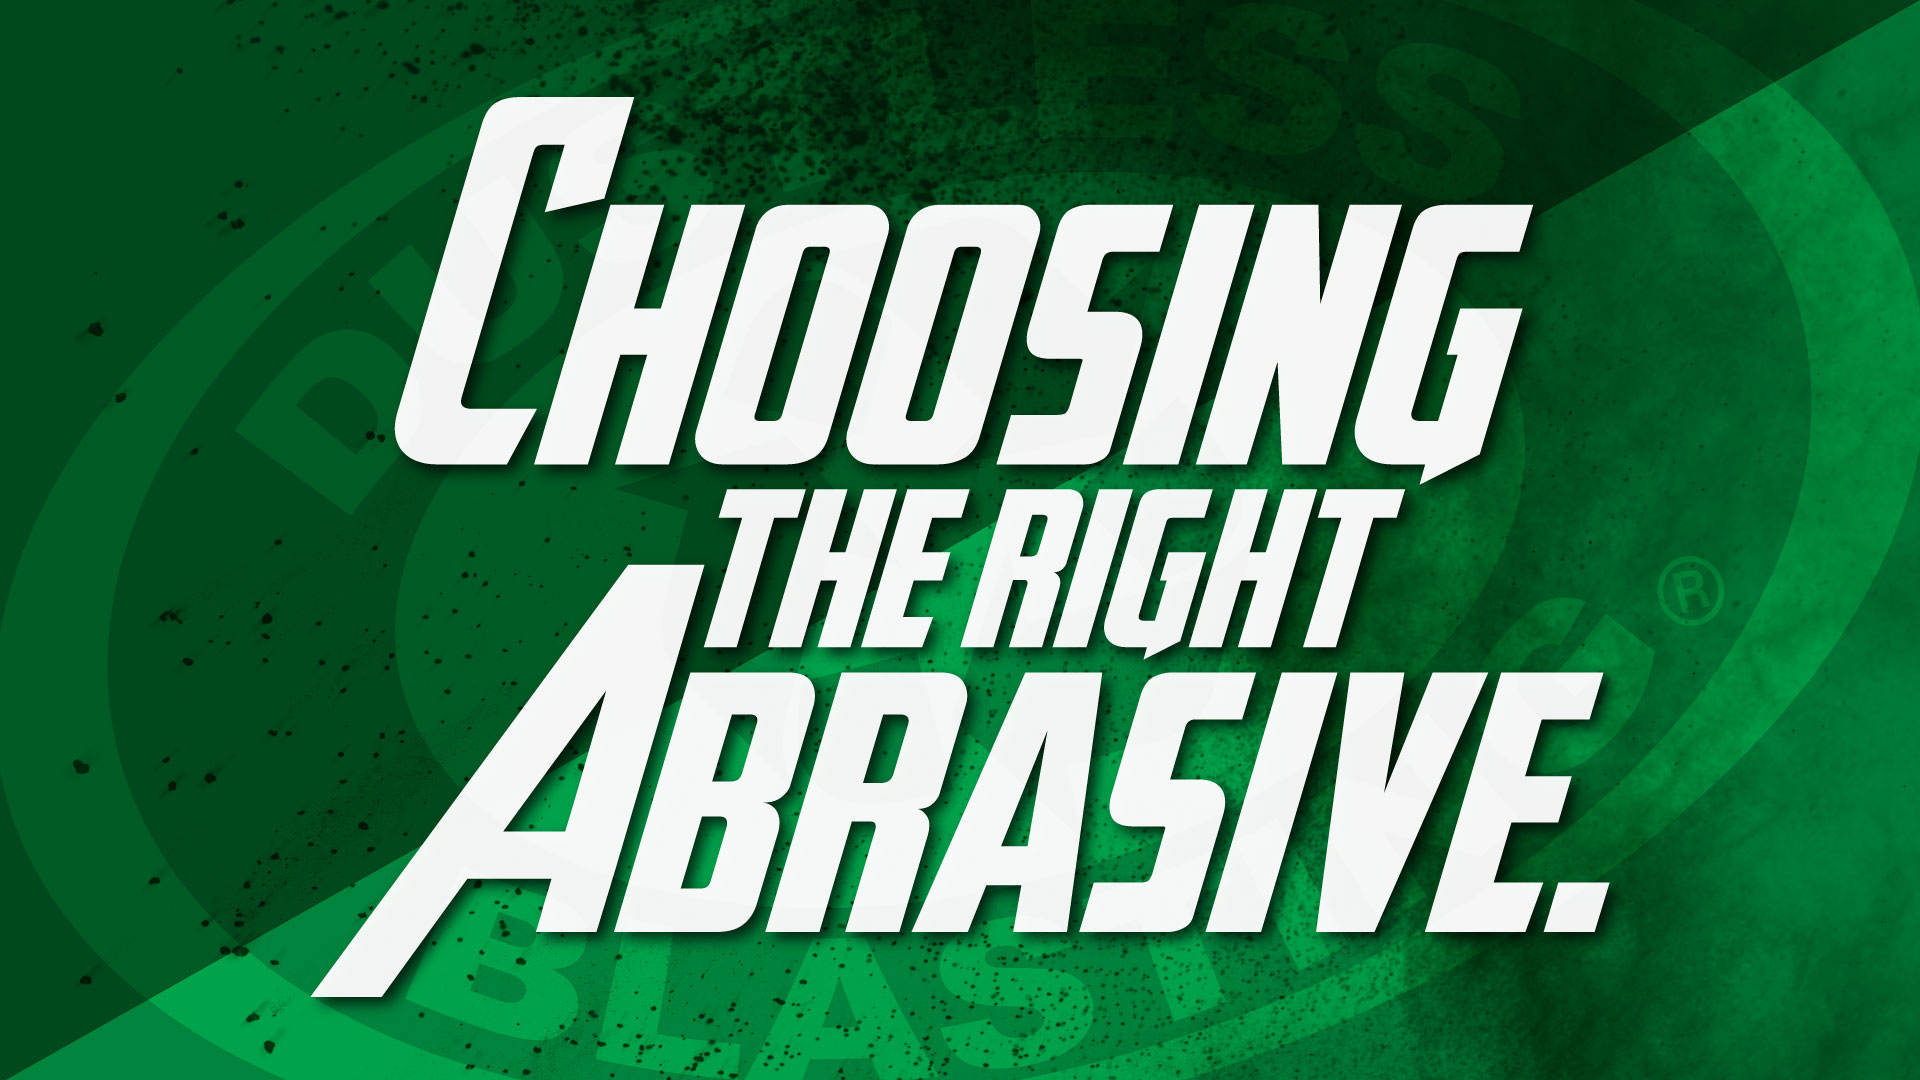 May 17 - Choosing the Right Abrasive 